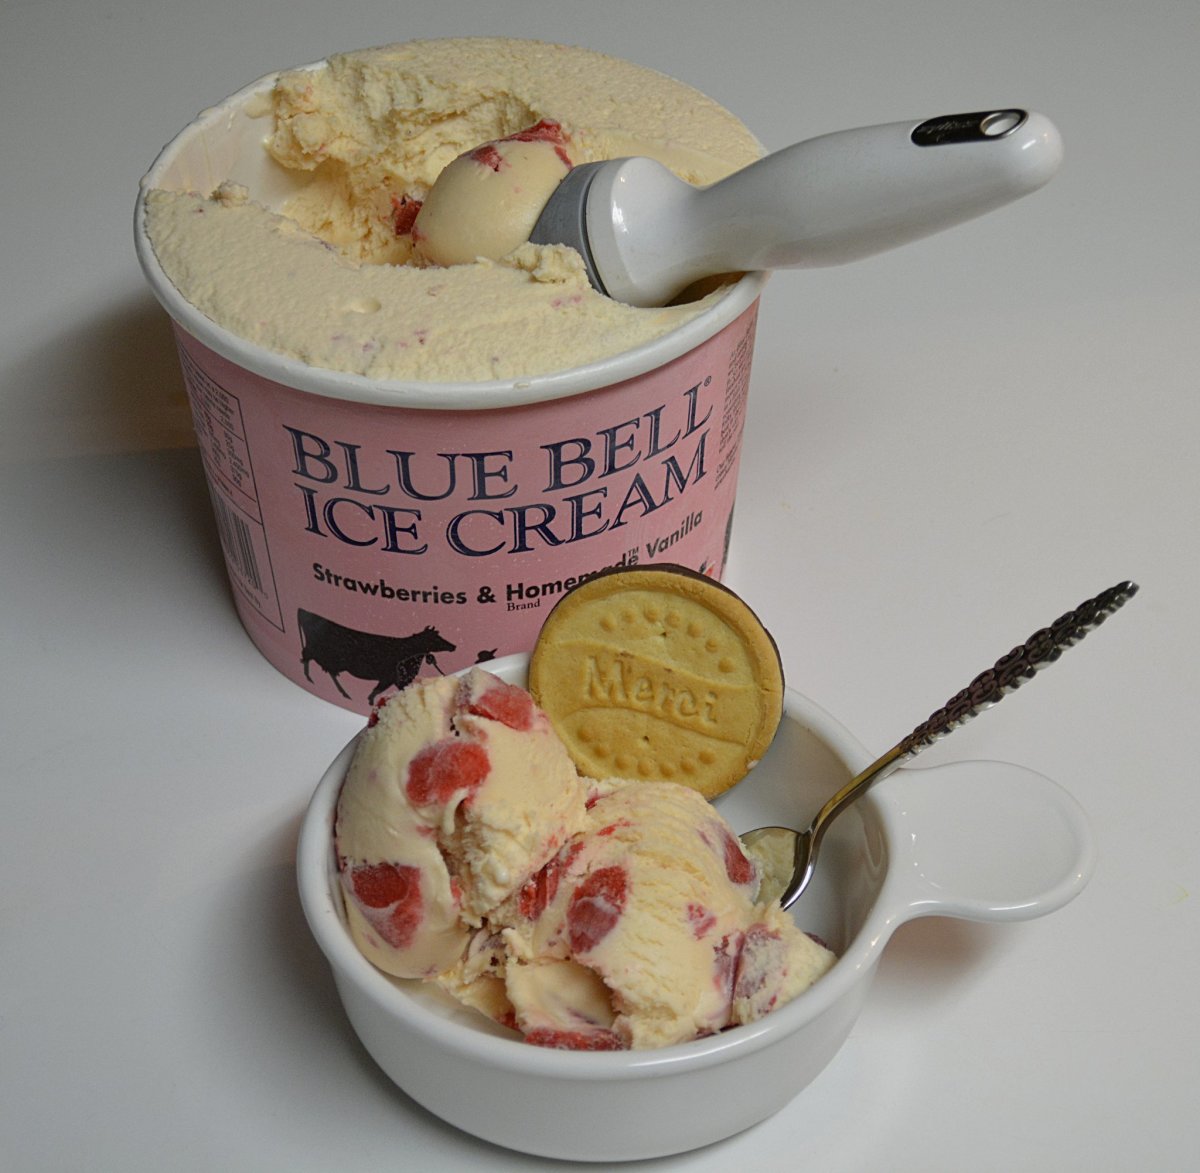 Blue Bell Ice Cream Recalls All Its Products After 3 Deaths Linked to Listeria